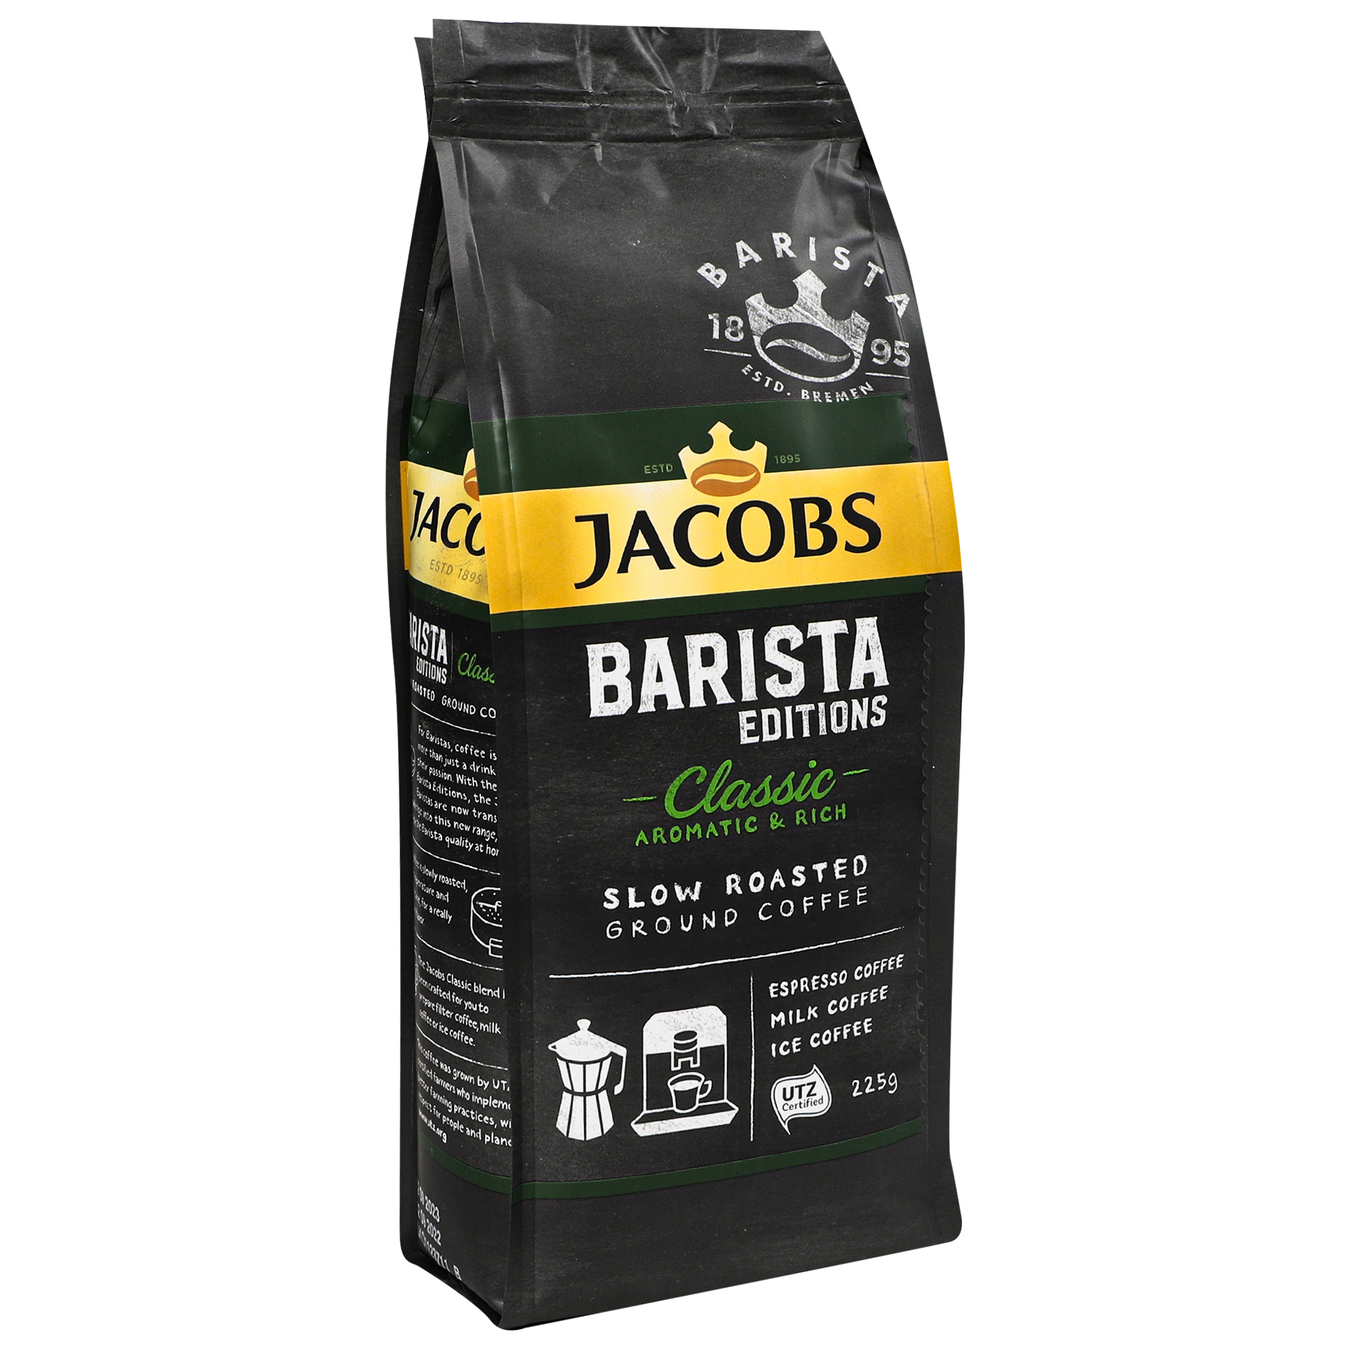 Jacobs Barista Editions Classic Ground Coffee 225g 2